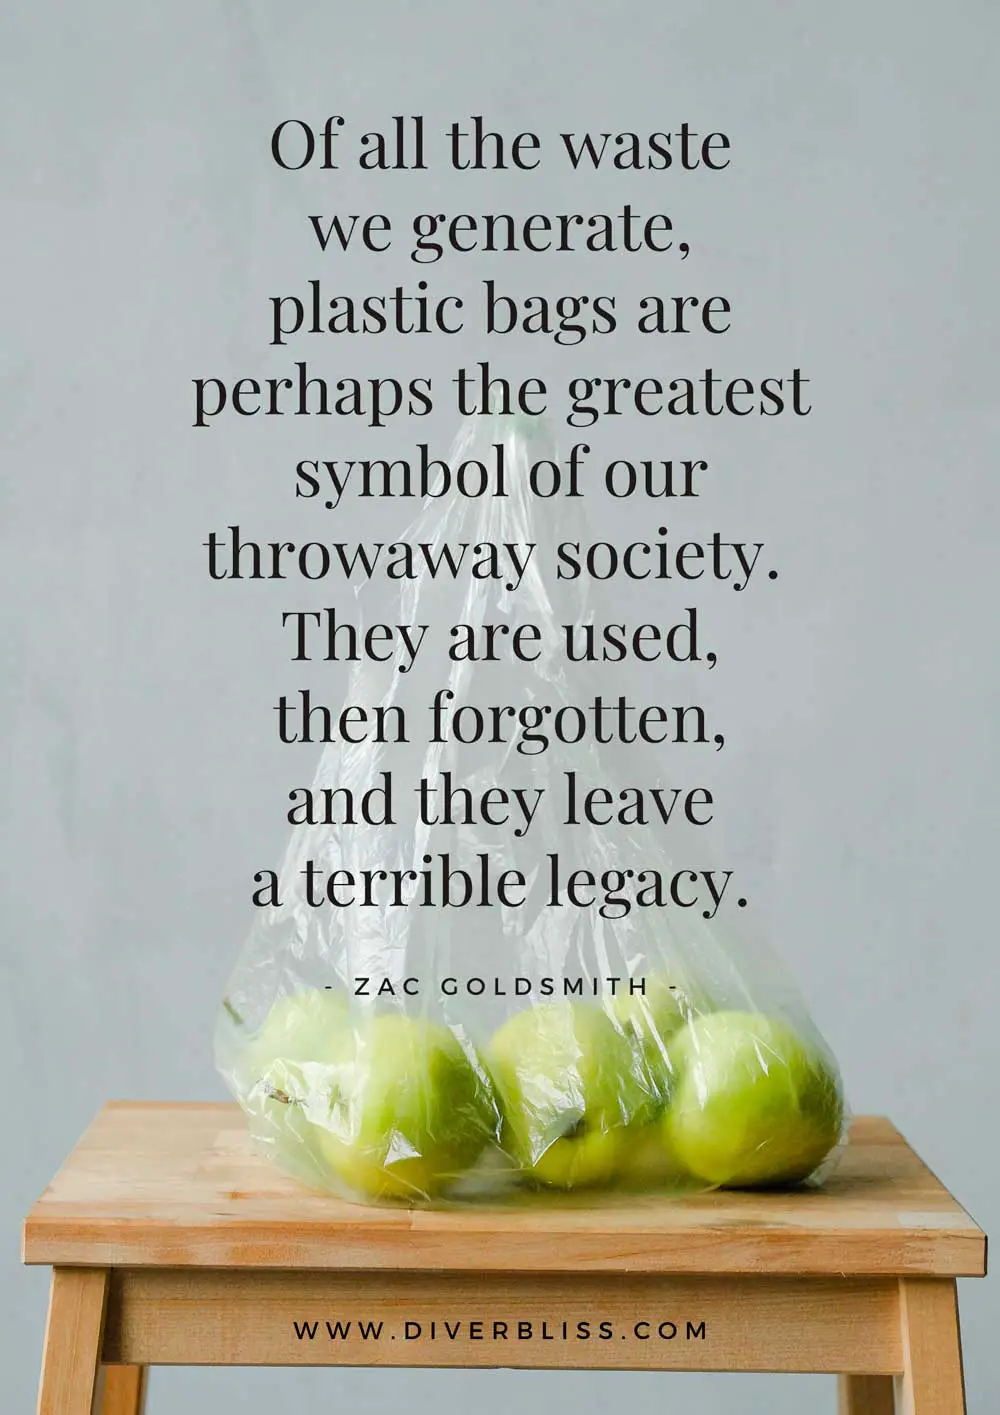 Single-Use Plastic Quotes Poster: “Of all the waste we generate, plastic bags are perhaps the greatest symbol of our throwaway society. They are used, then forgotten, and they leave a terrible legacy. – Zac Goldsmith